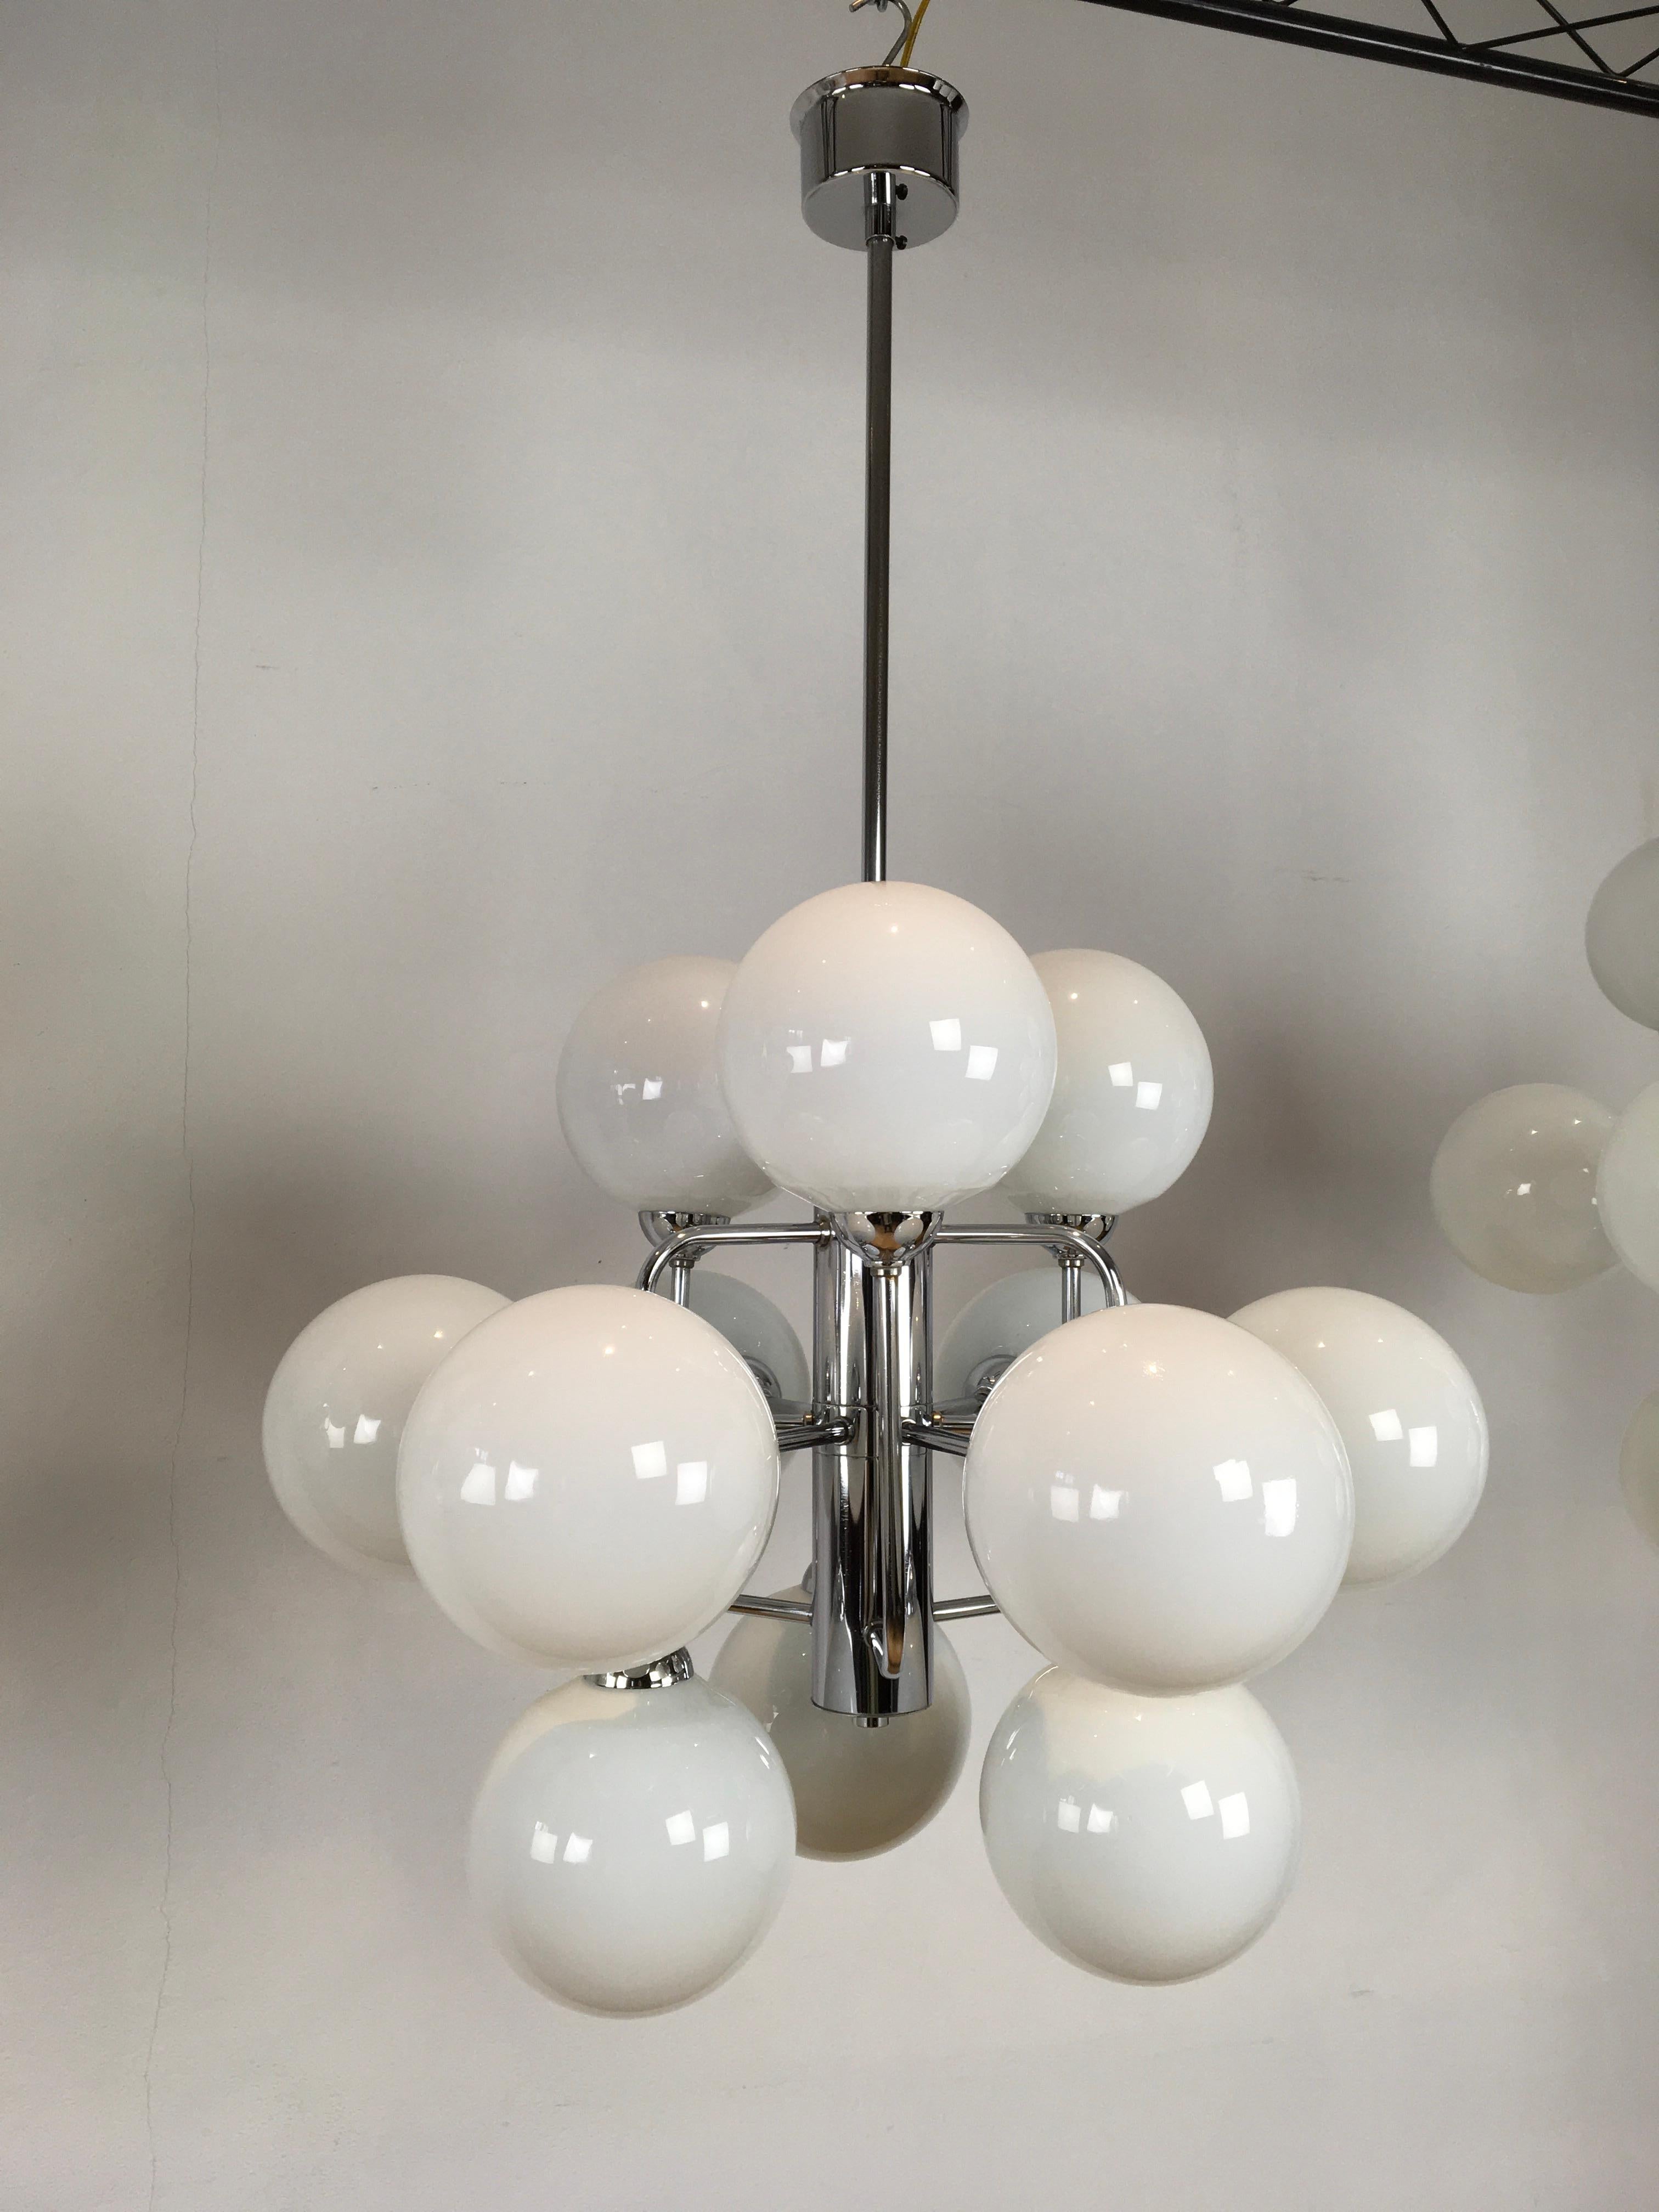 European Mid-Century Atomic Chandeliers with 12 Lights, 3 Pieces Available For Sale